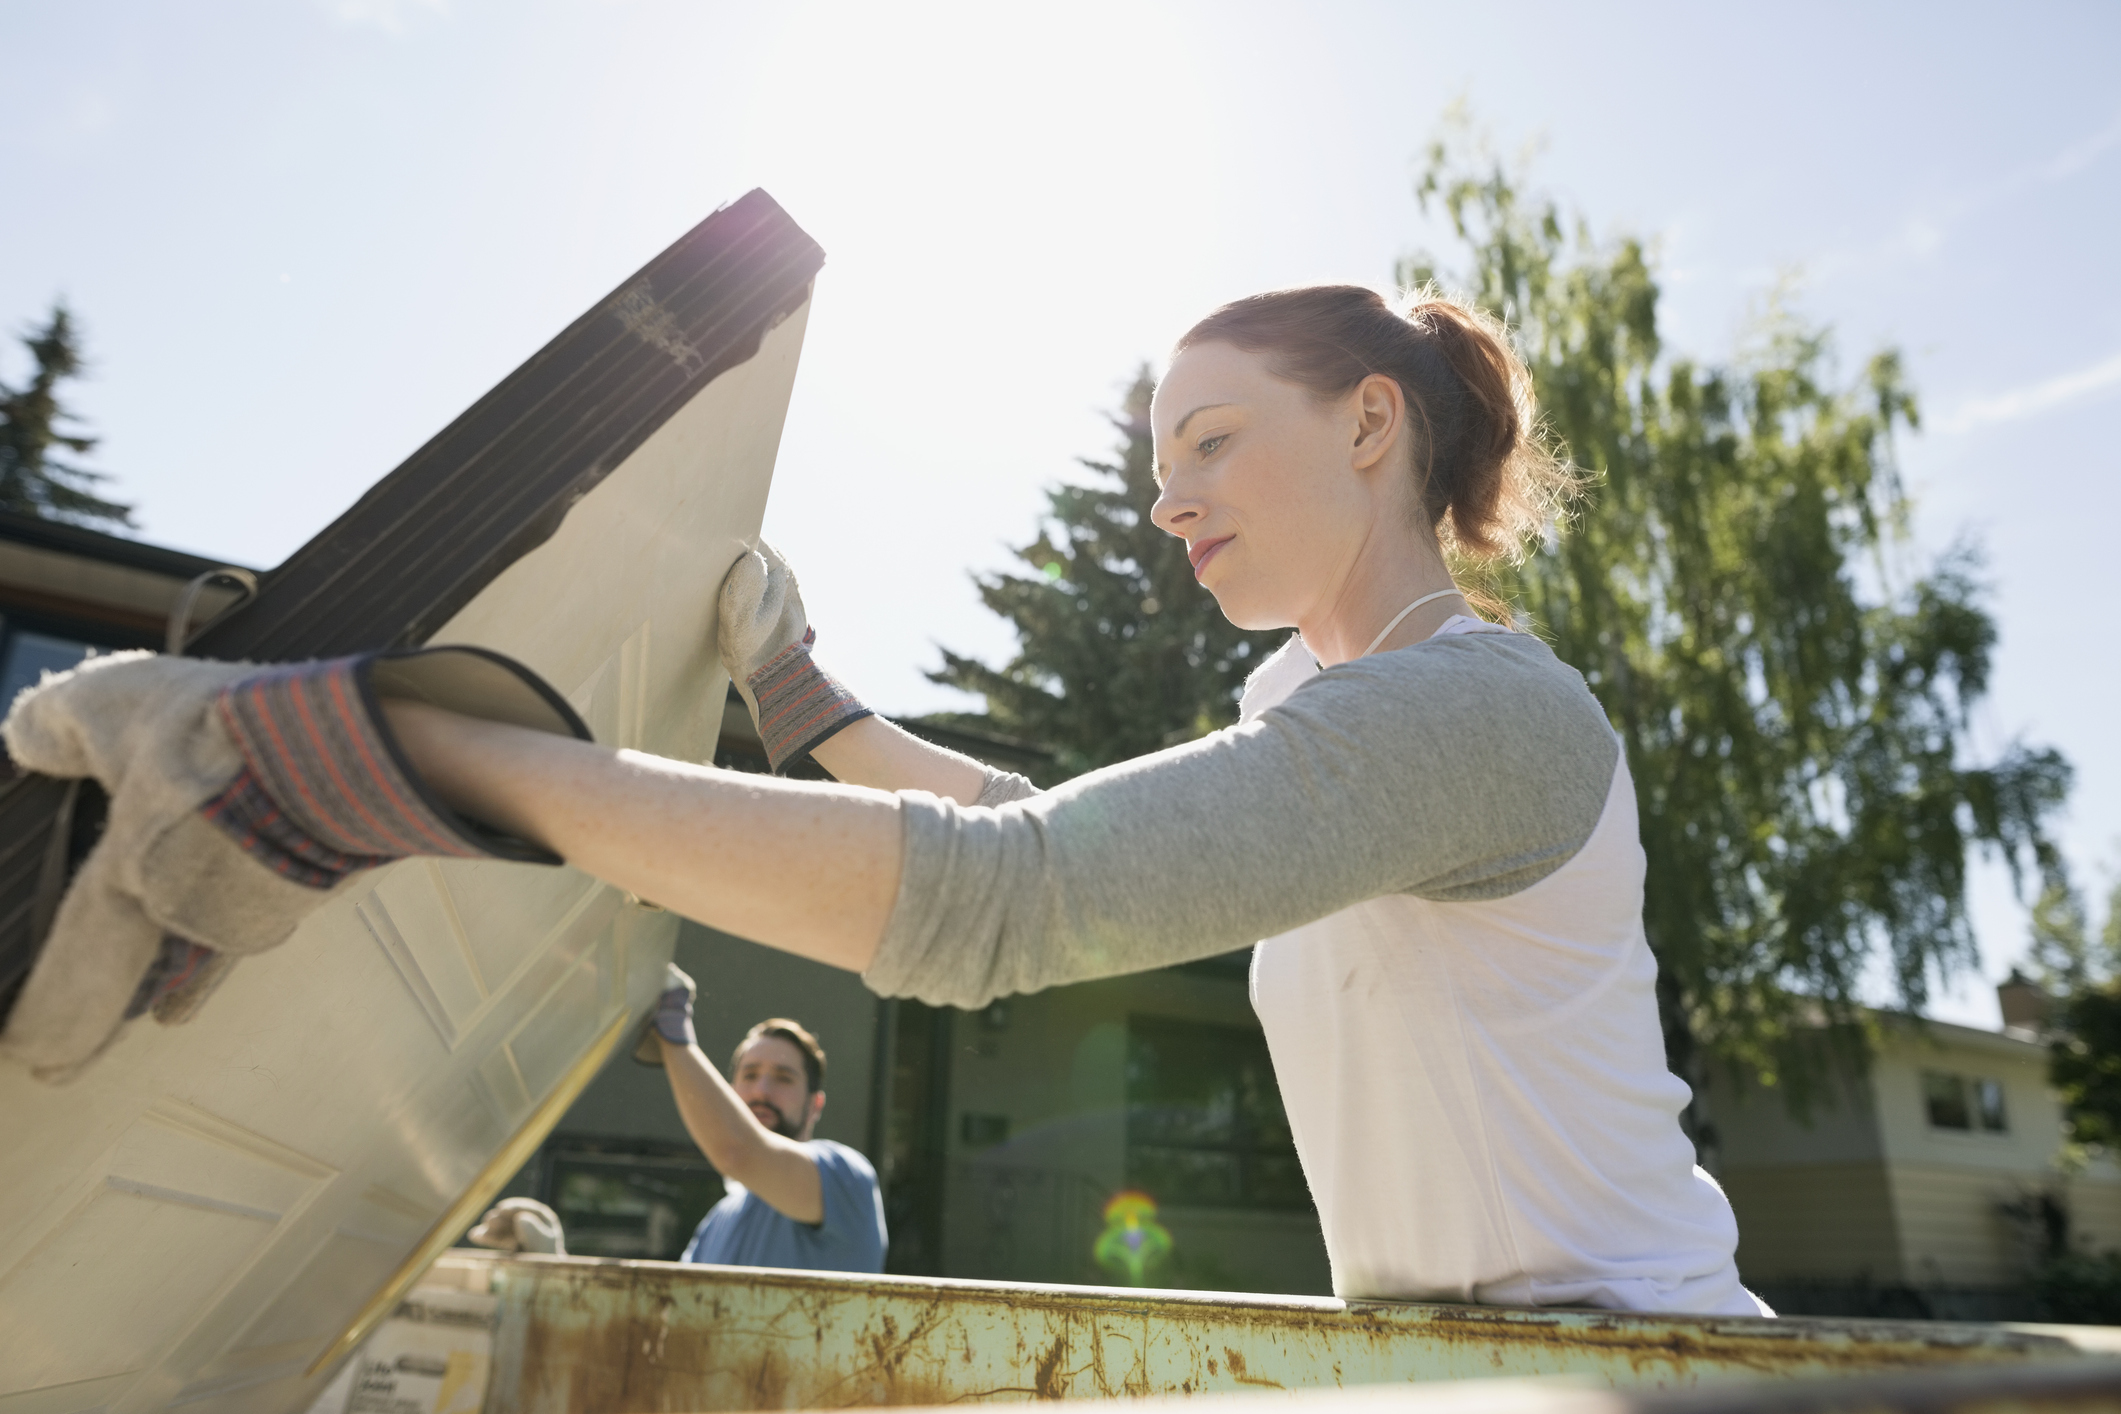  Renovating home or house extension- skip bins 